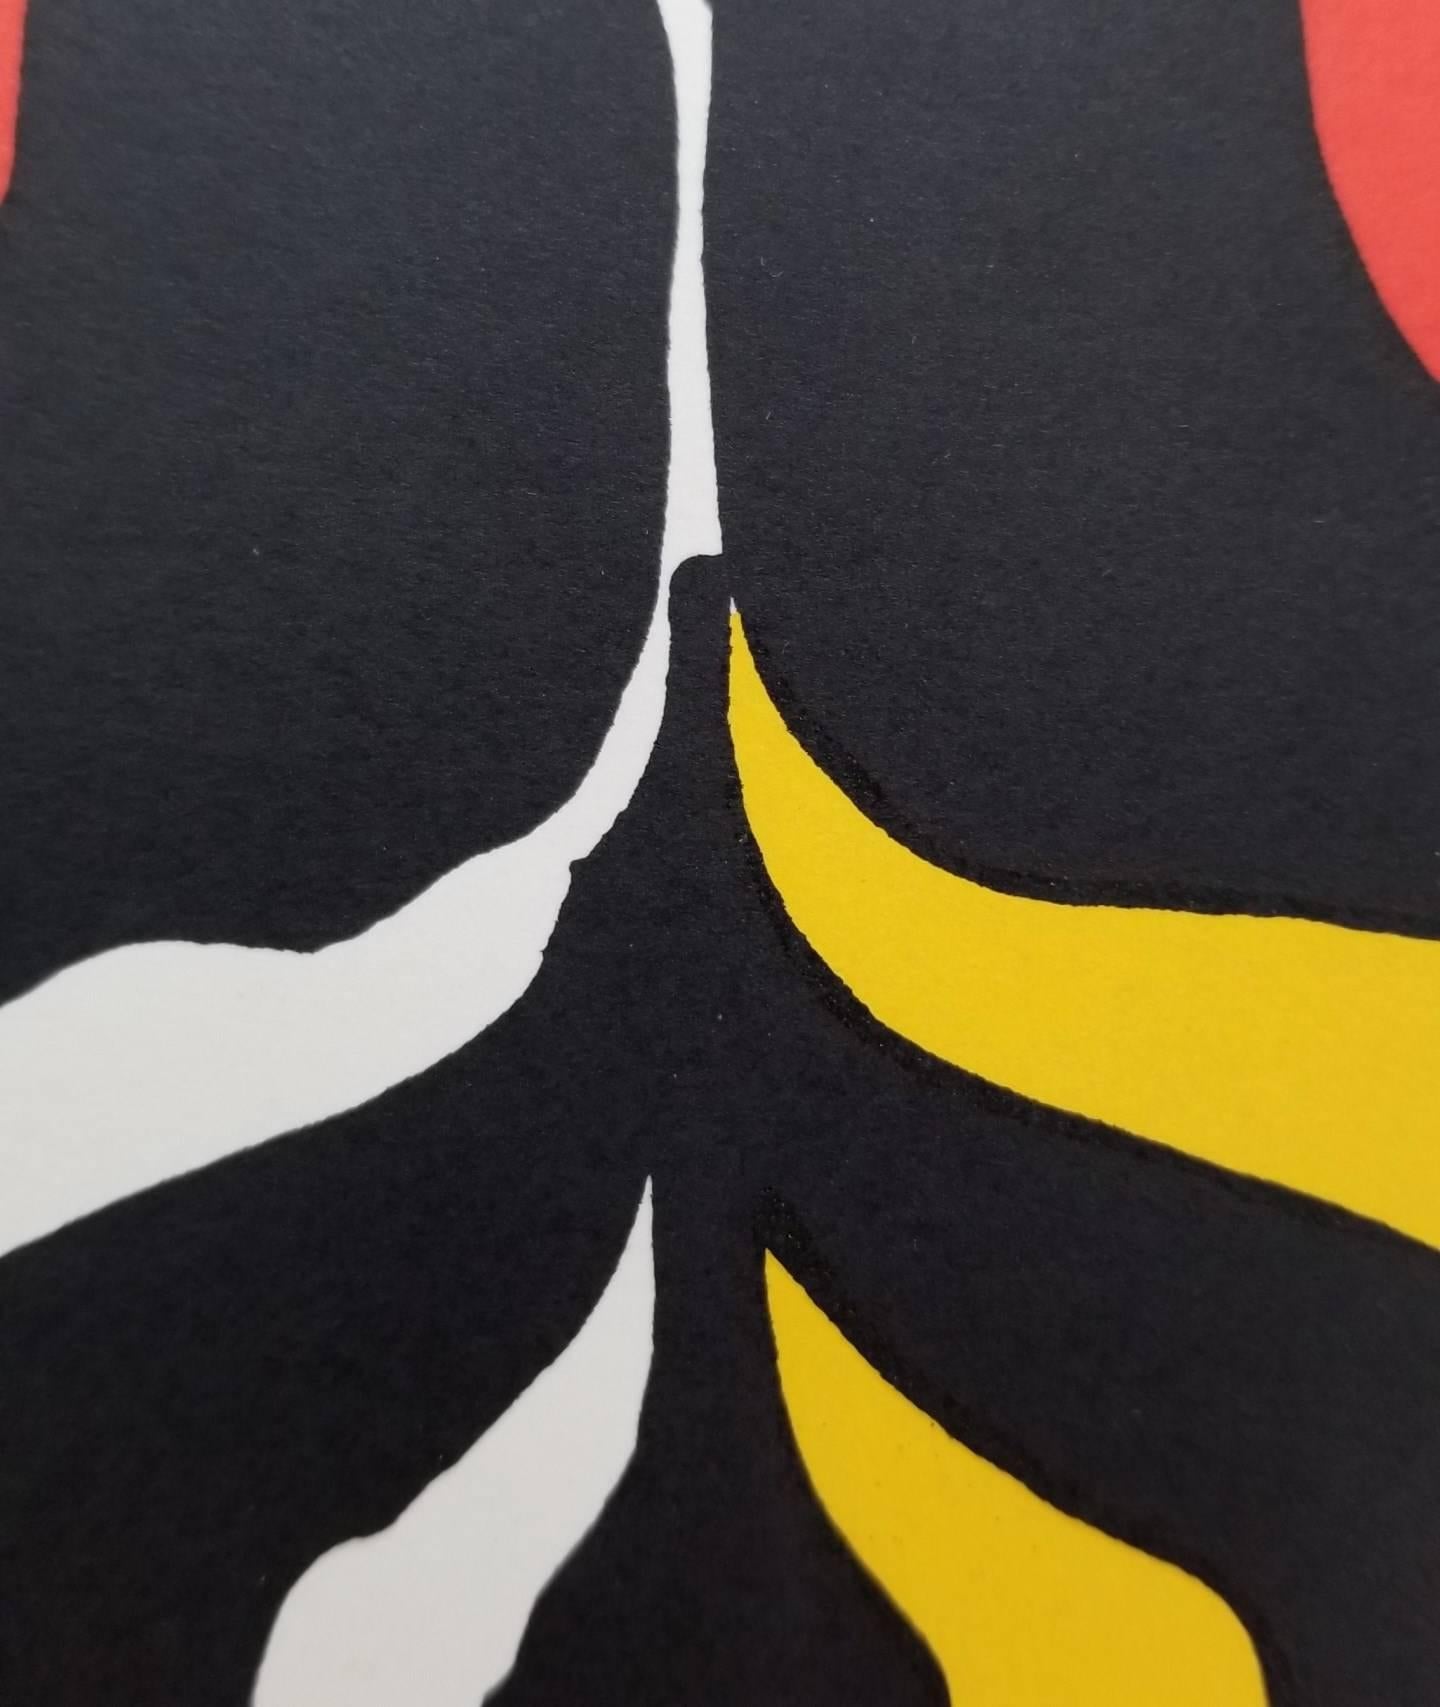 An original lithograph on smooth wove paper by American artist Alexander Calder (1898-1976) titled 